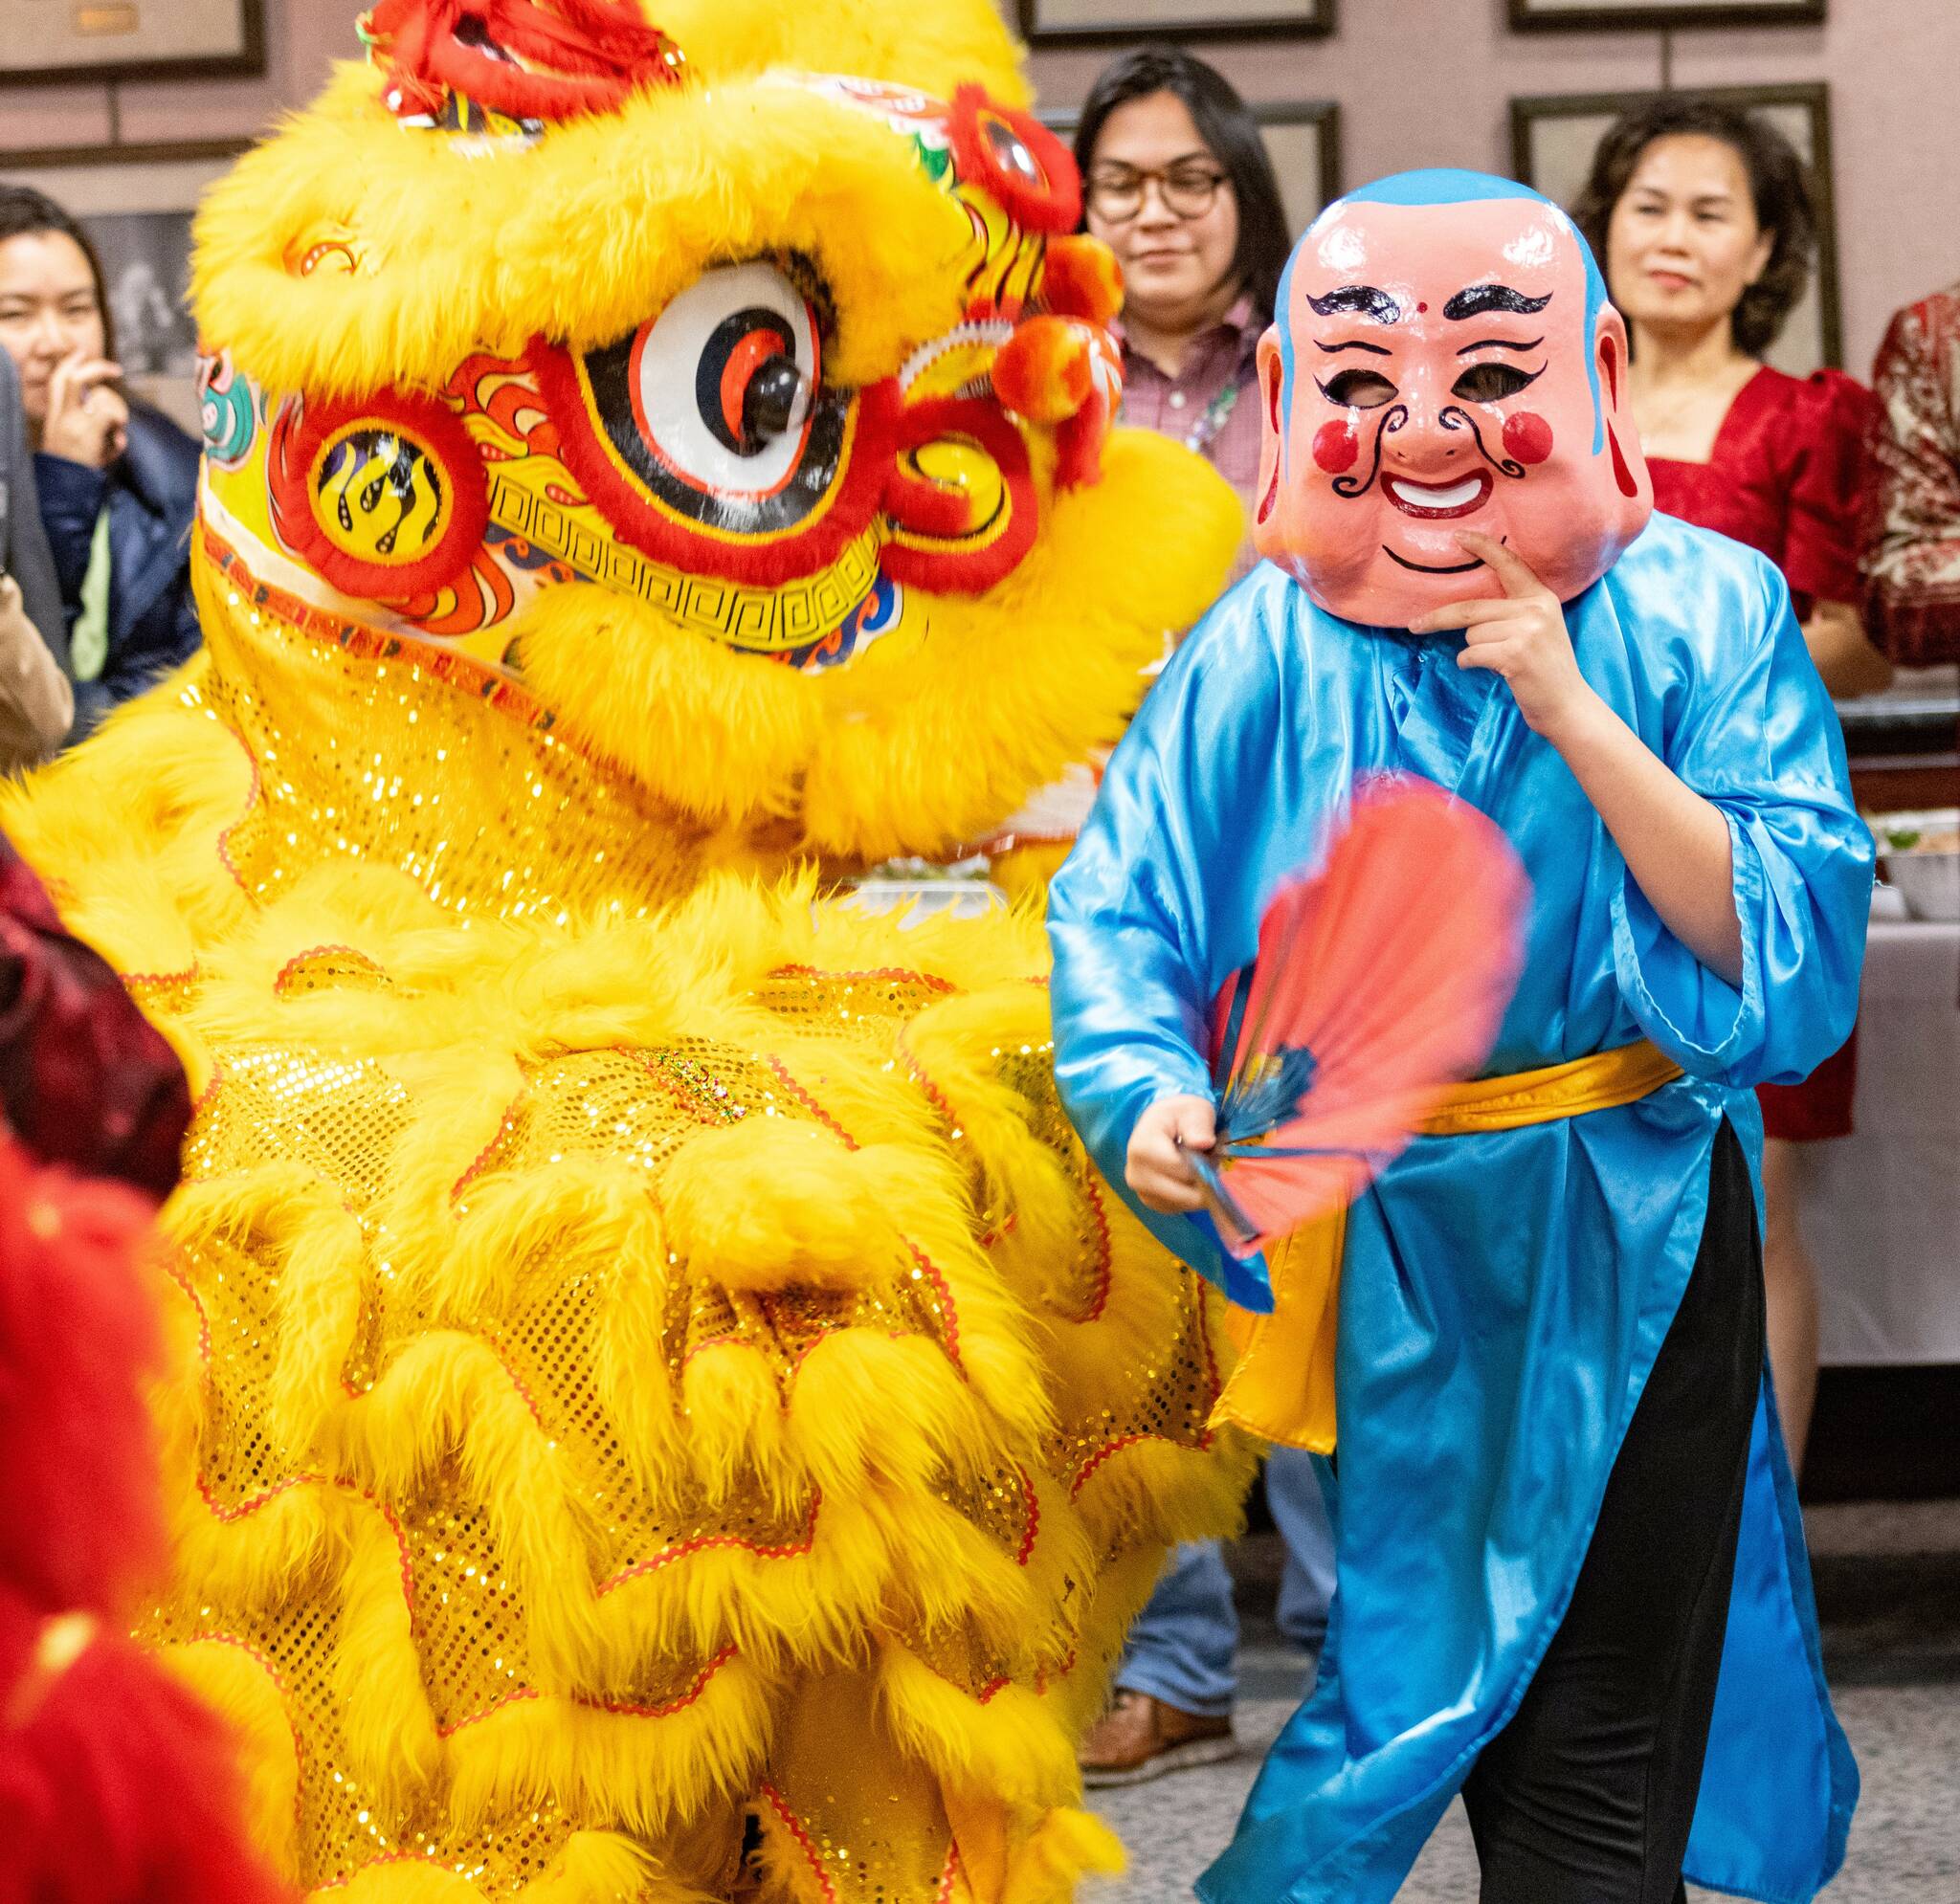 Photos courtesy of the City of Renton.
Lunar New Year is celebrated with dancing that includes Chinese lions, Buddha, drums, a gong and cymbals.